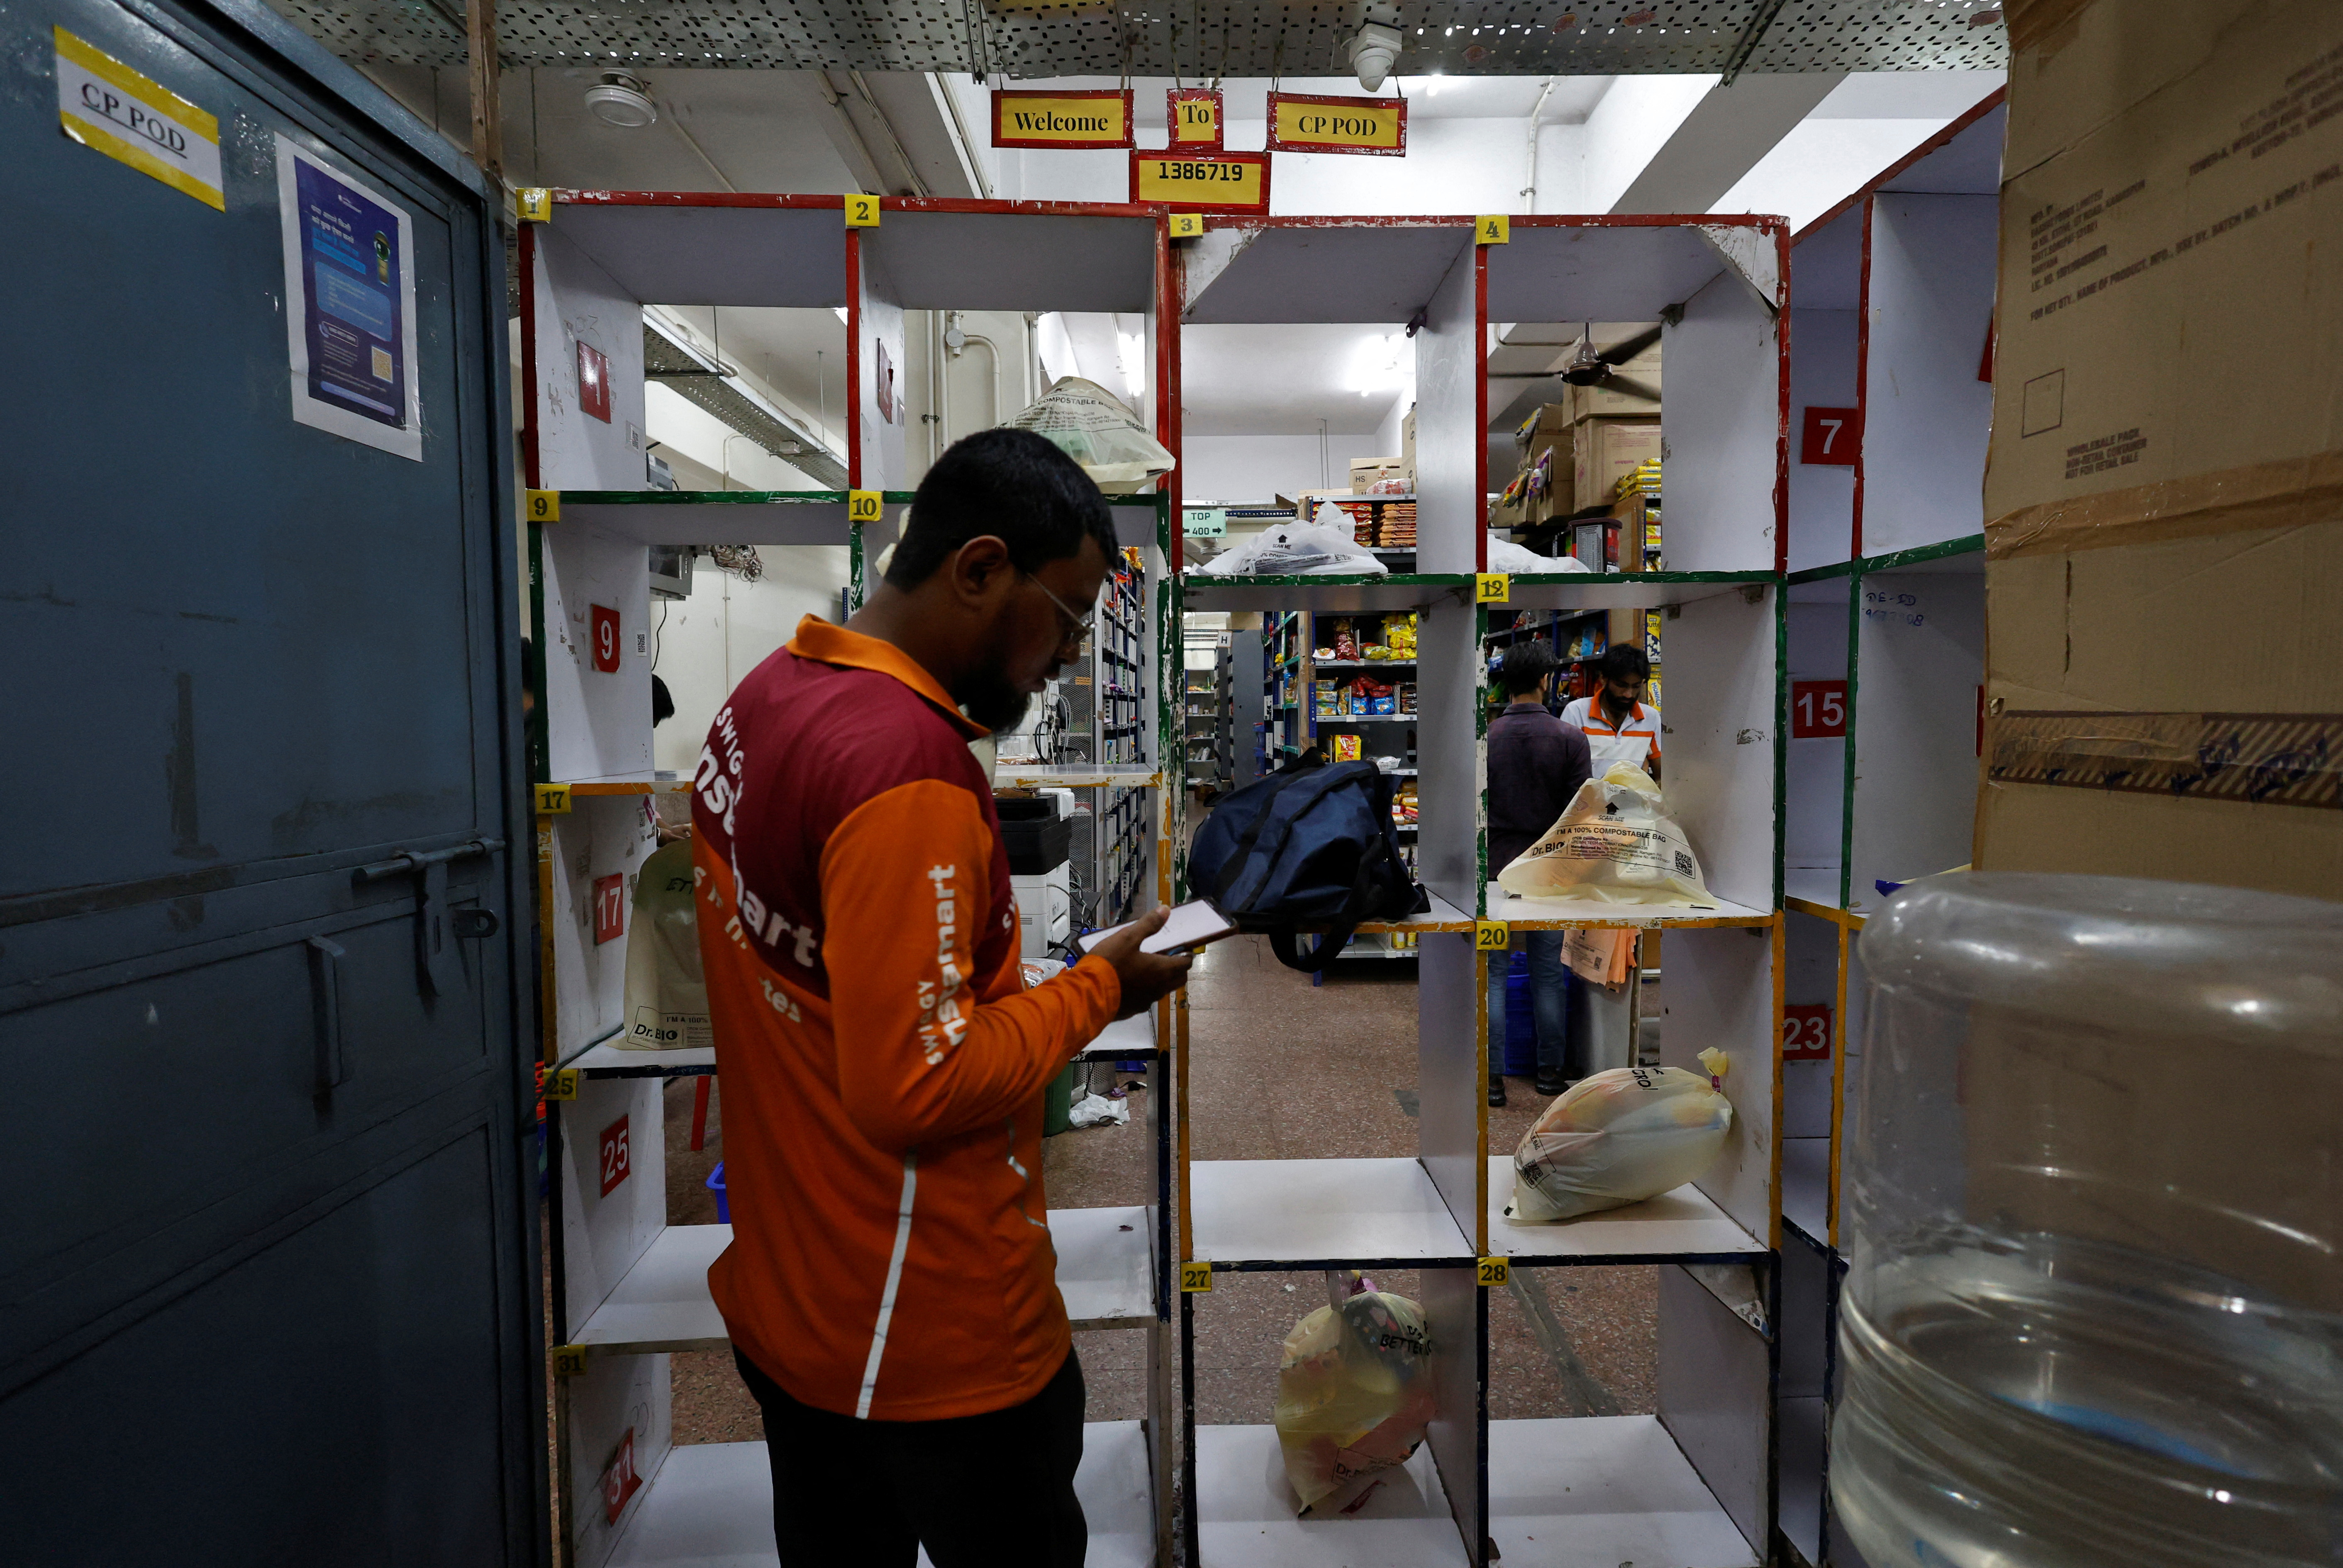 A gig worker picks up groceries for an order from a Swiggy's grocery warehouse, in New Delhi